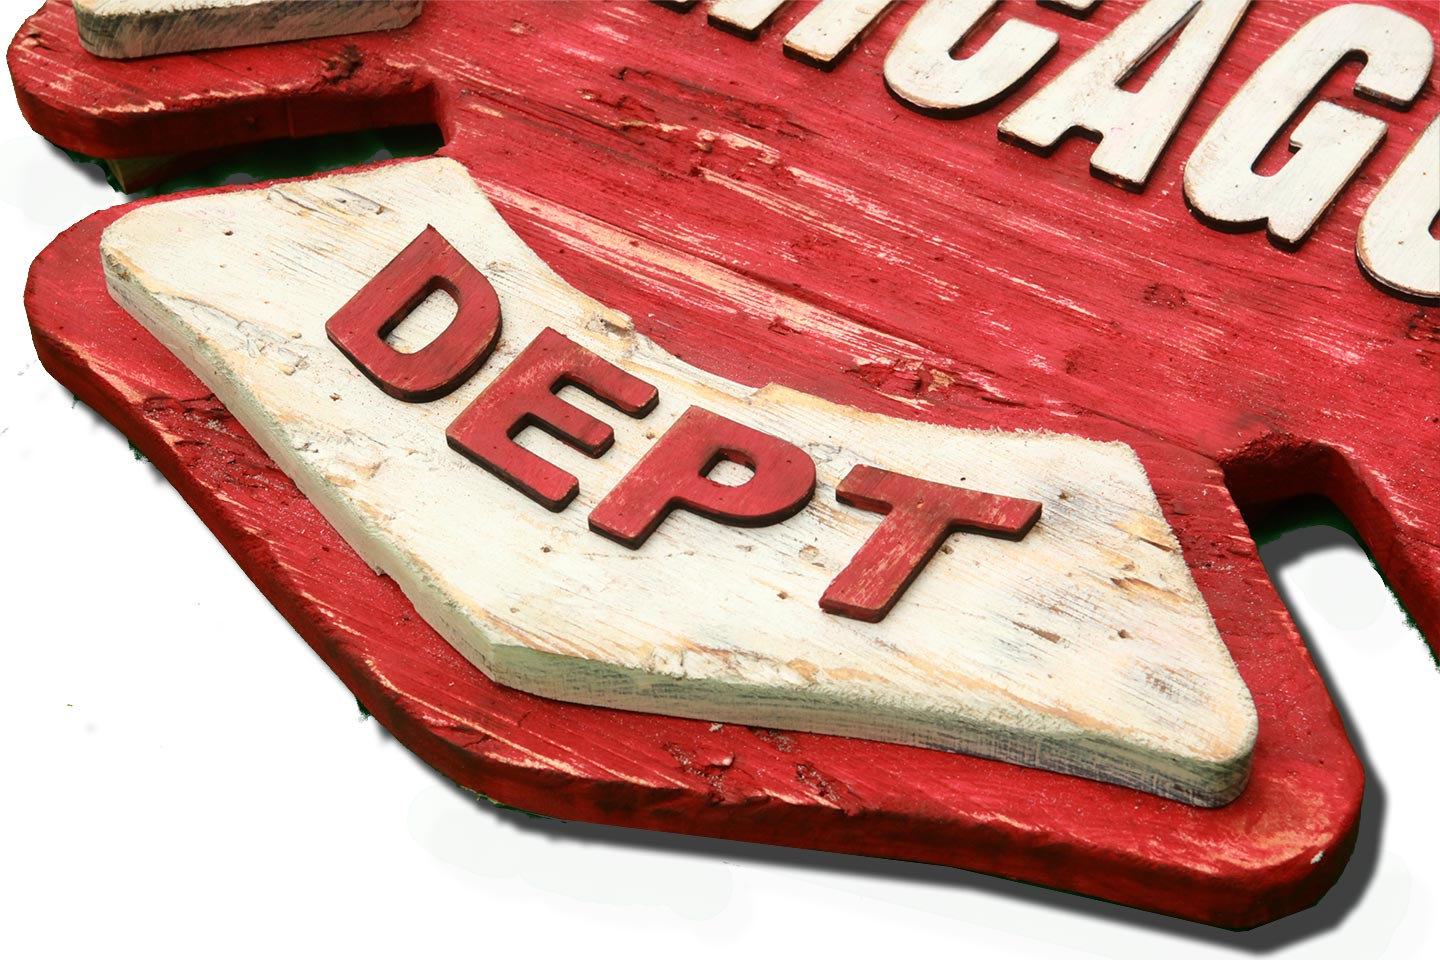 Personalized Maltese Fire Dept Sign Handmade reclaimed wood sign, vintage, art, recycled, Chicago Fire Department, Wall art, Man Cave, Red